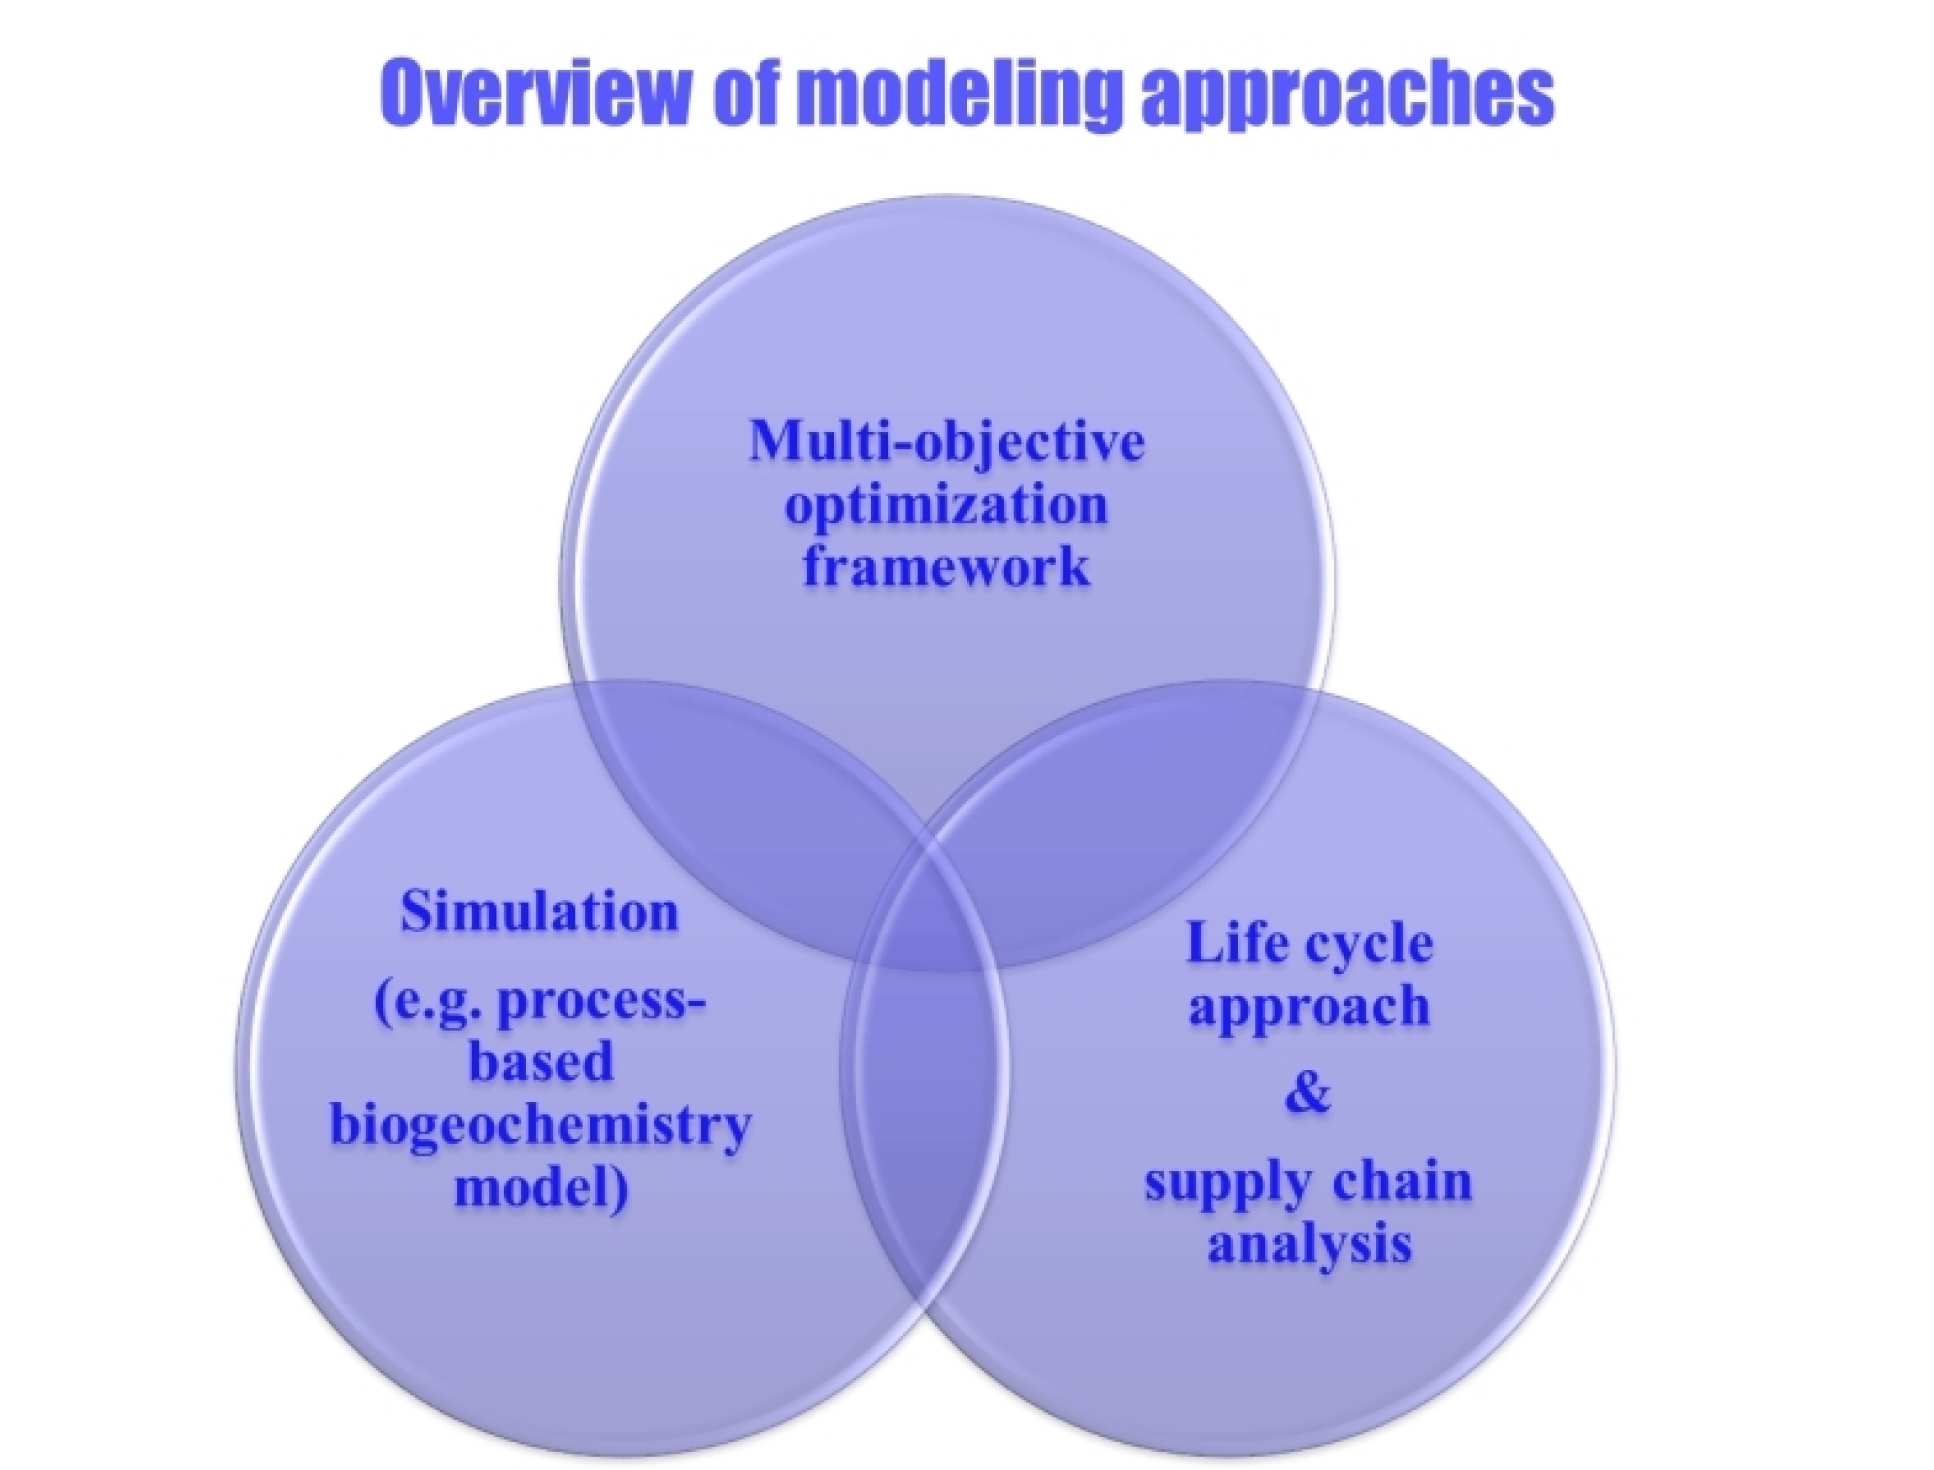 Overview of modelling approaches